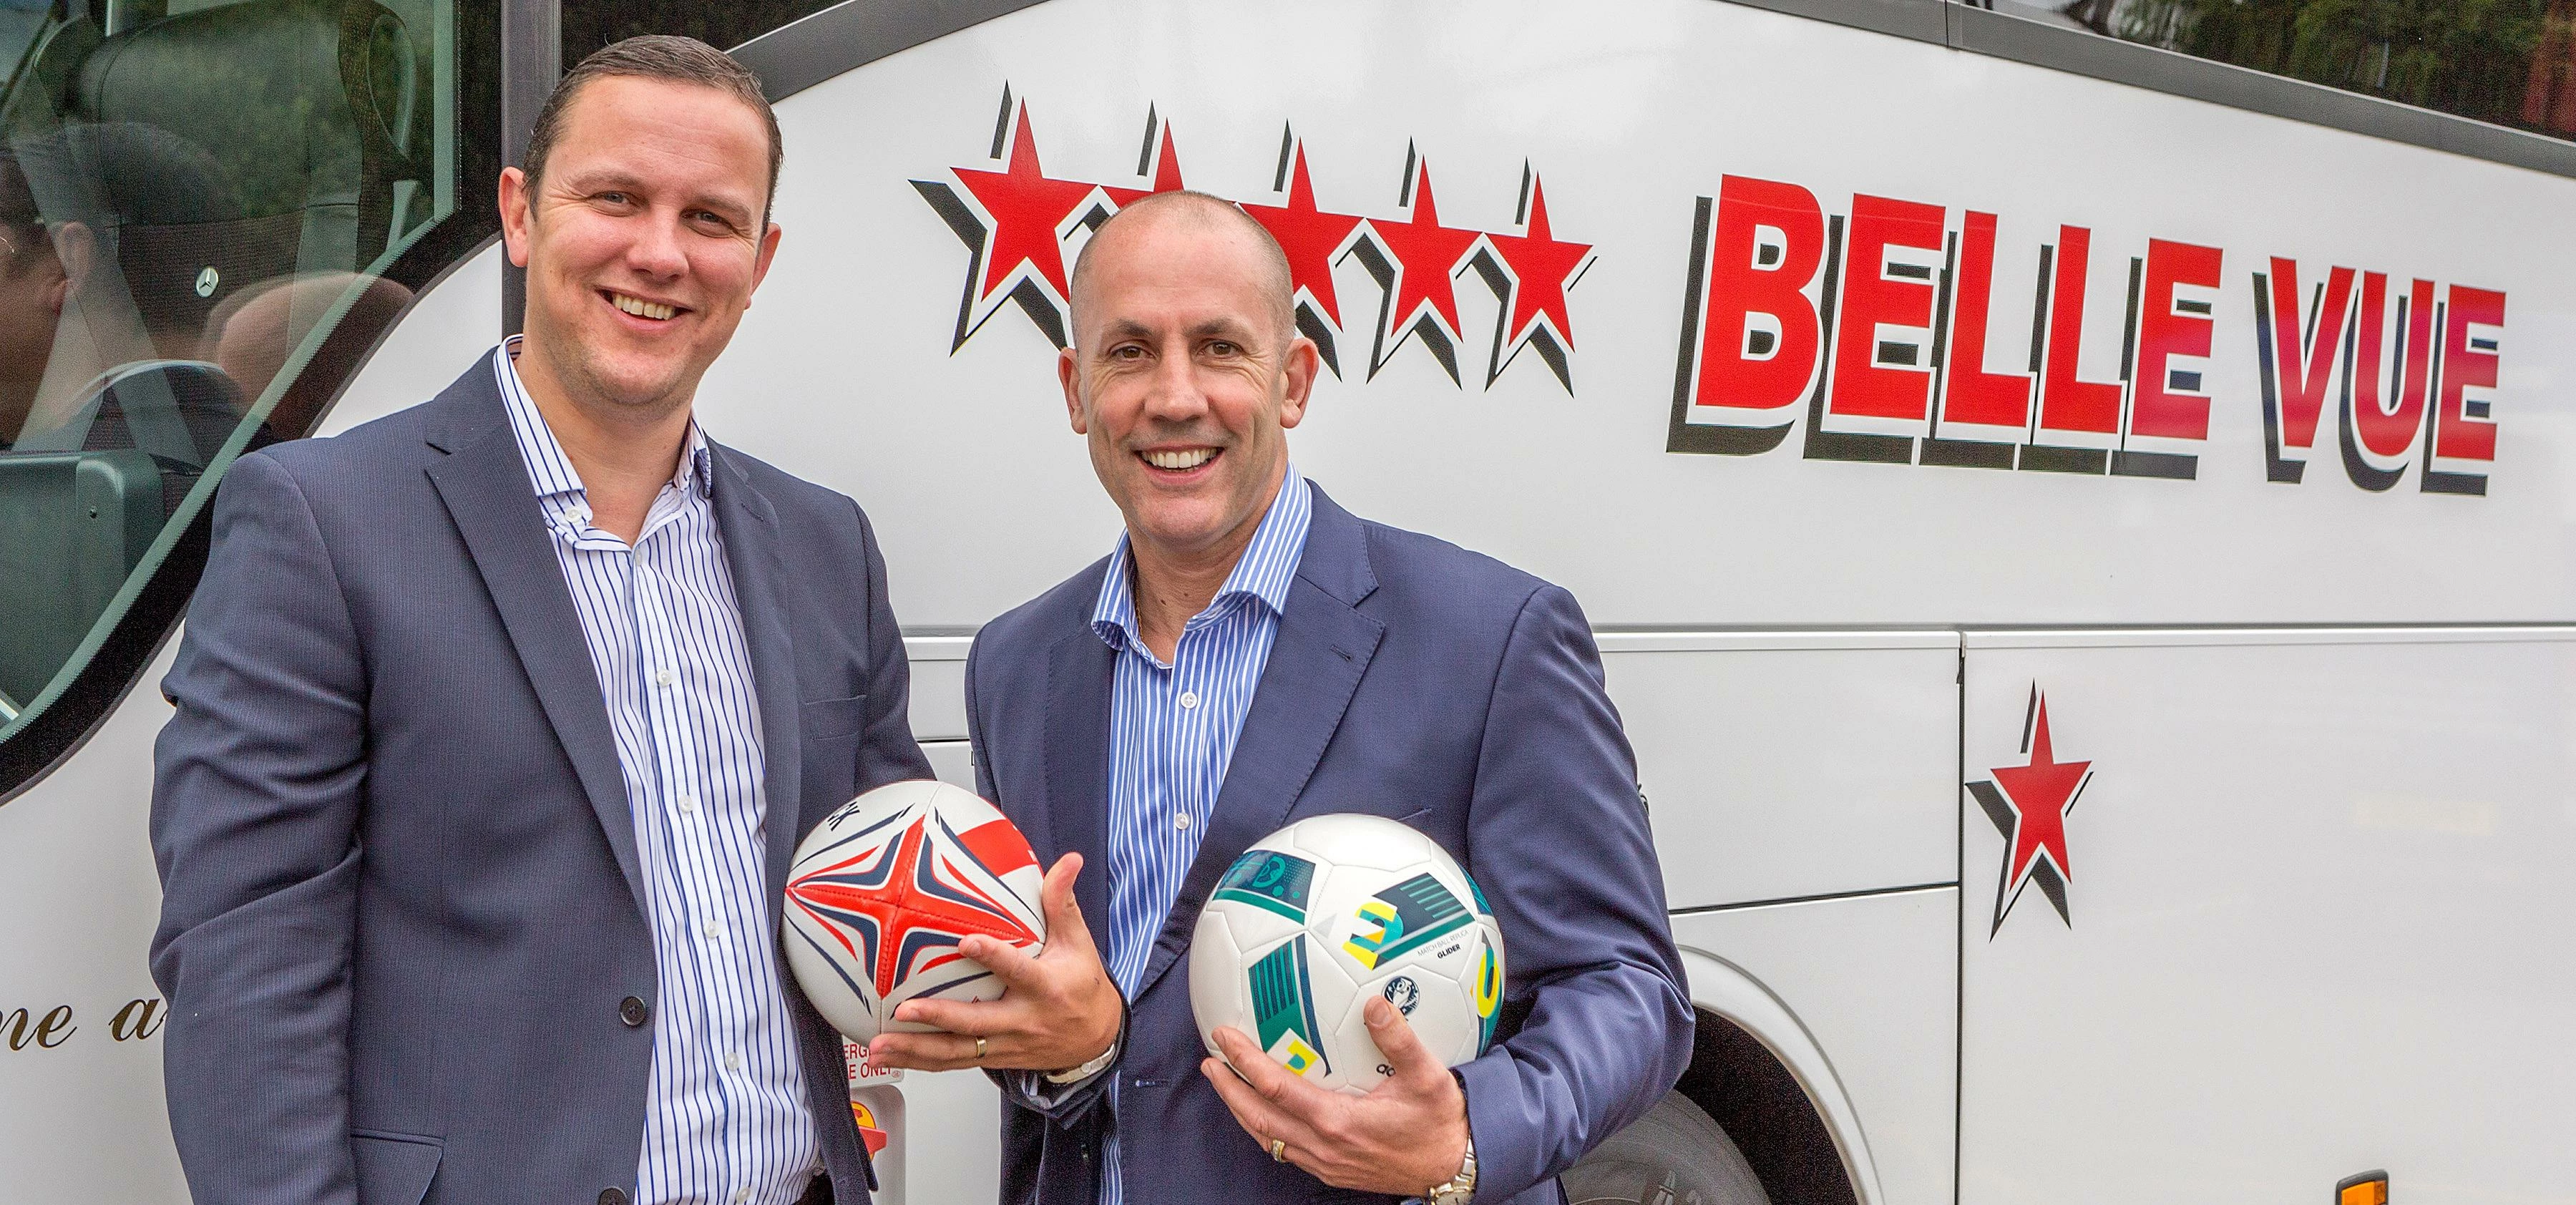 Steve Butchart, CEO of inspiresport, is pictured, left, with Phil Hitchen, managing director of Bell